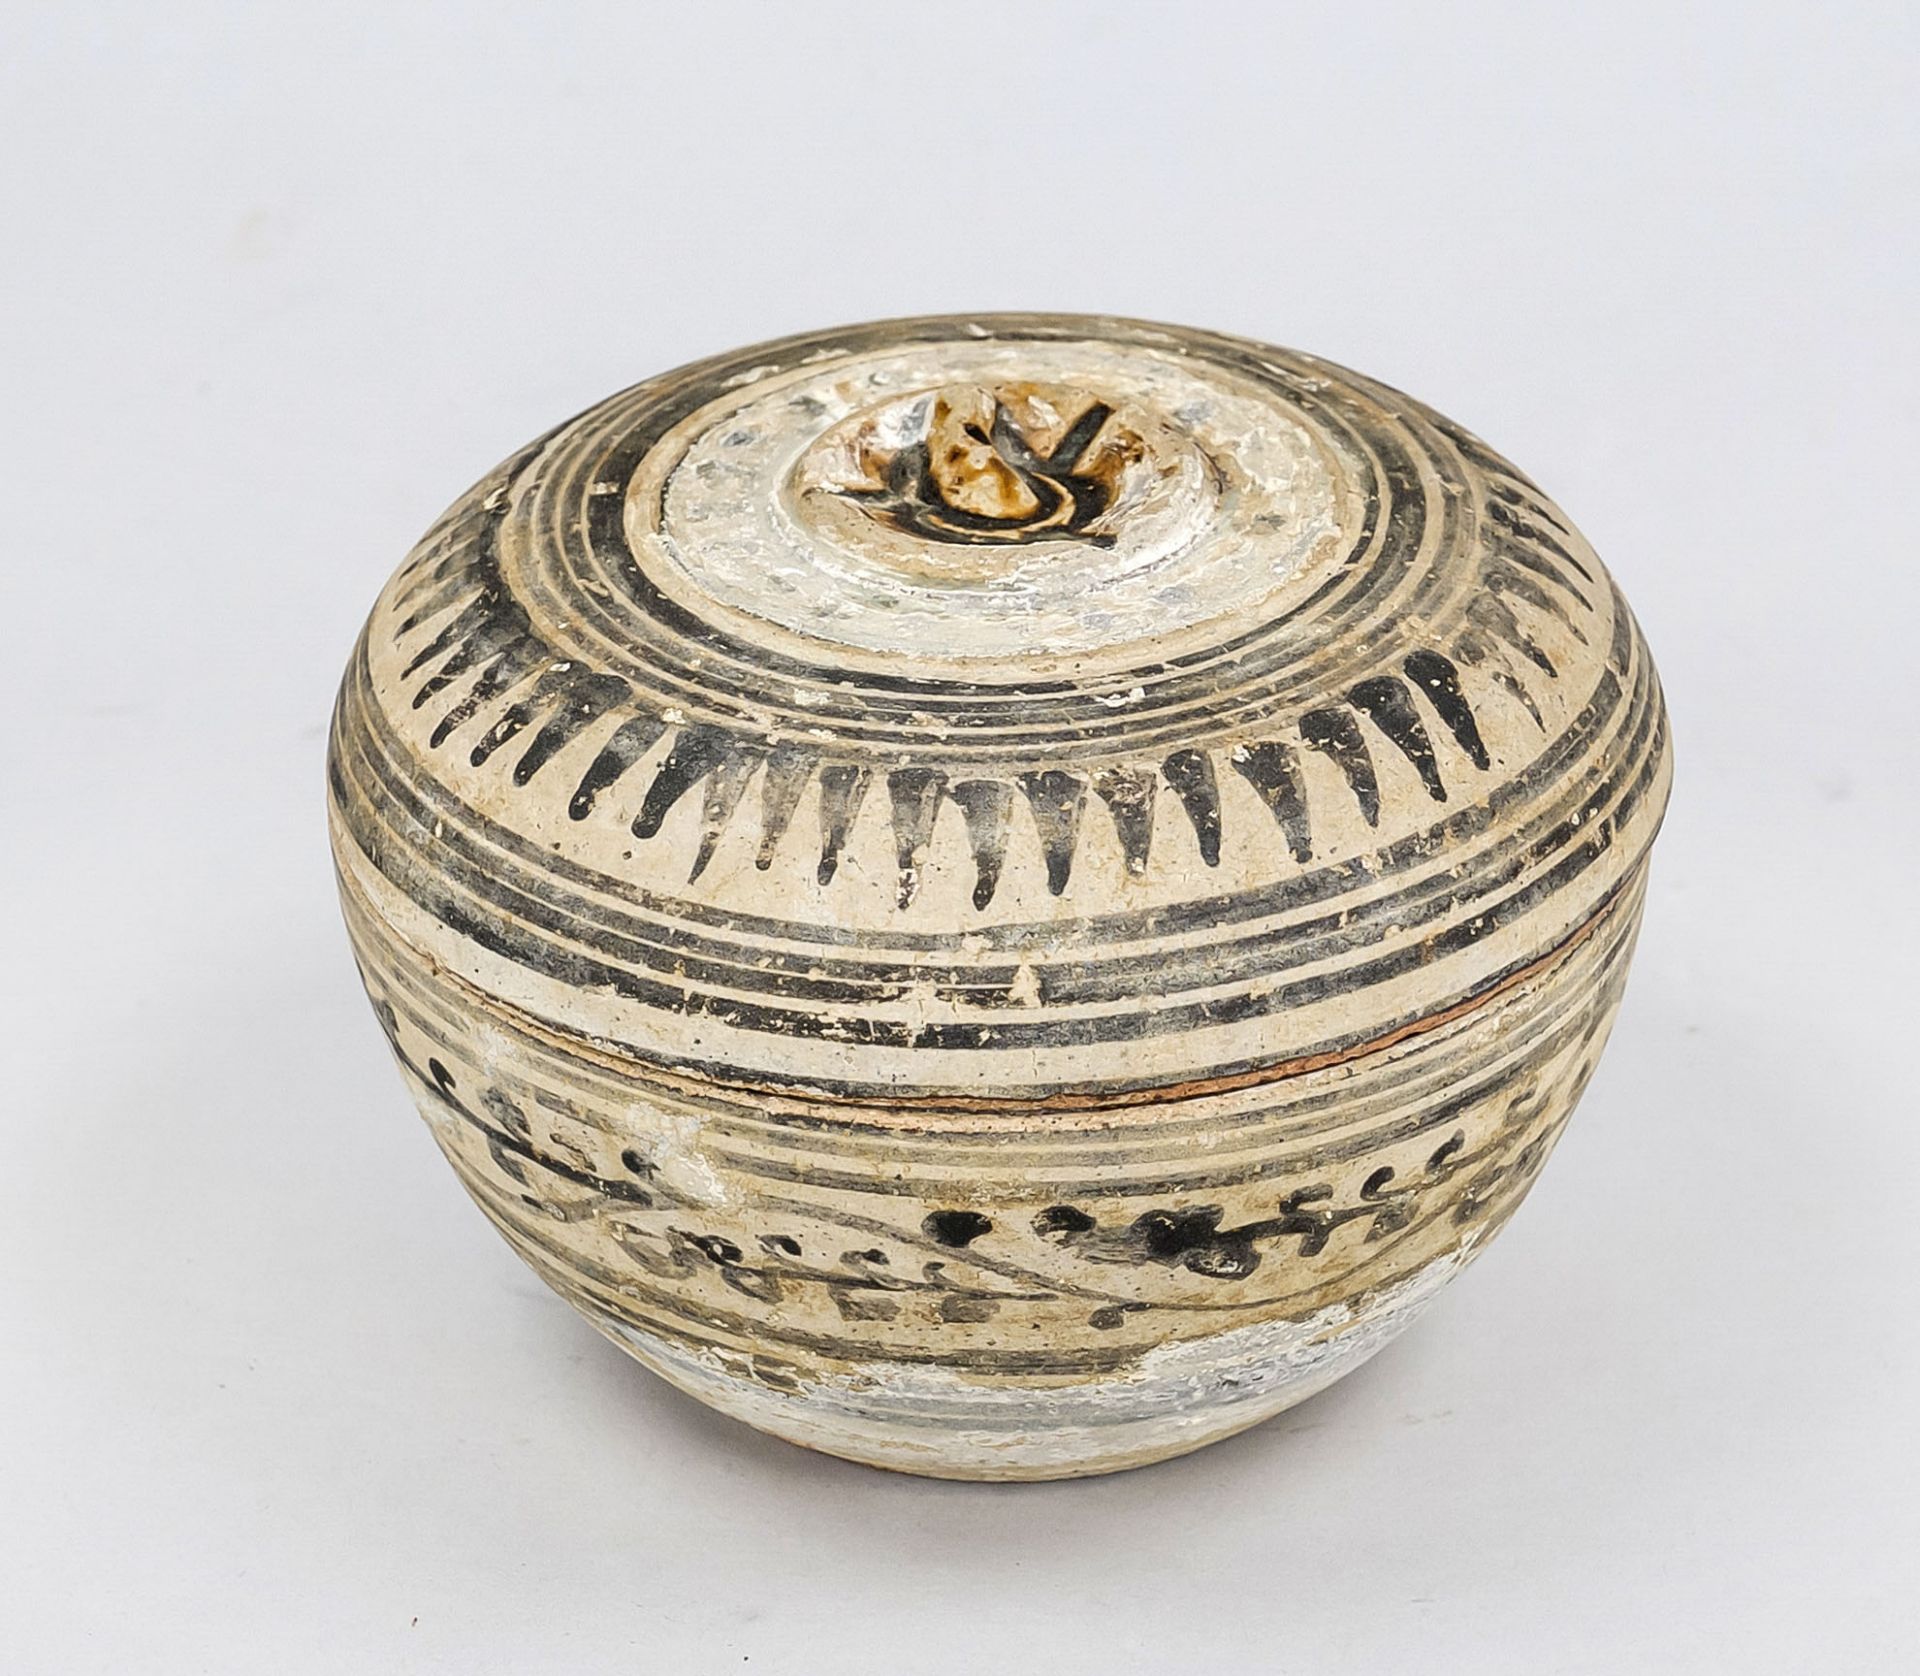 Lidded box, Thailand/Sawankhalok 14th/15th century, decorated all around and on the lid in cold